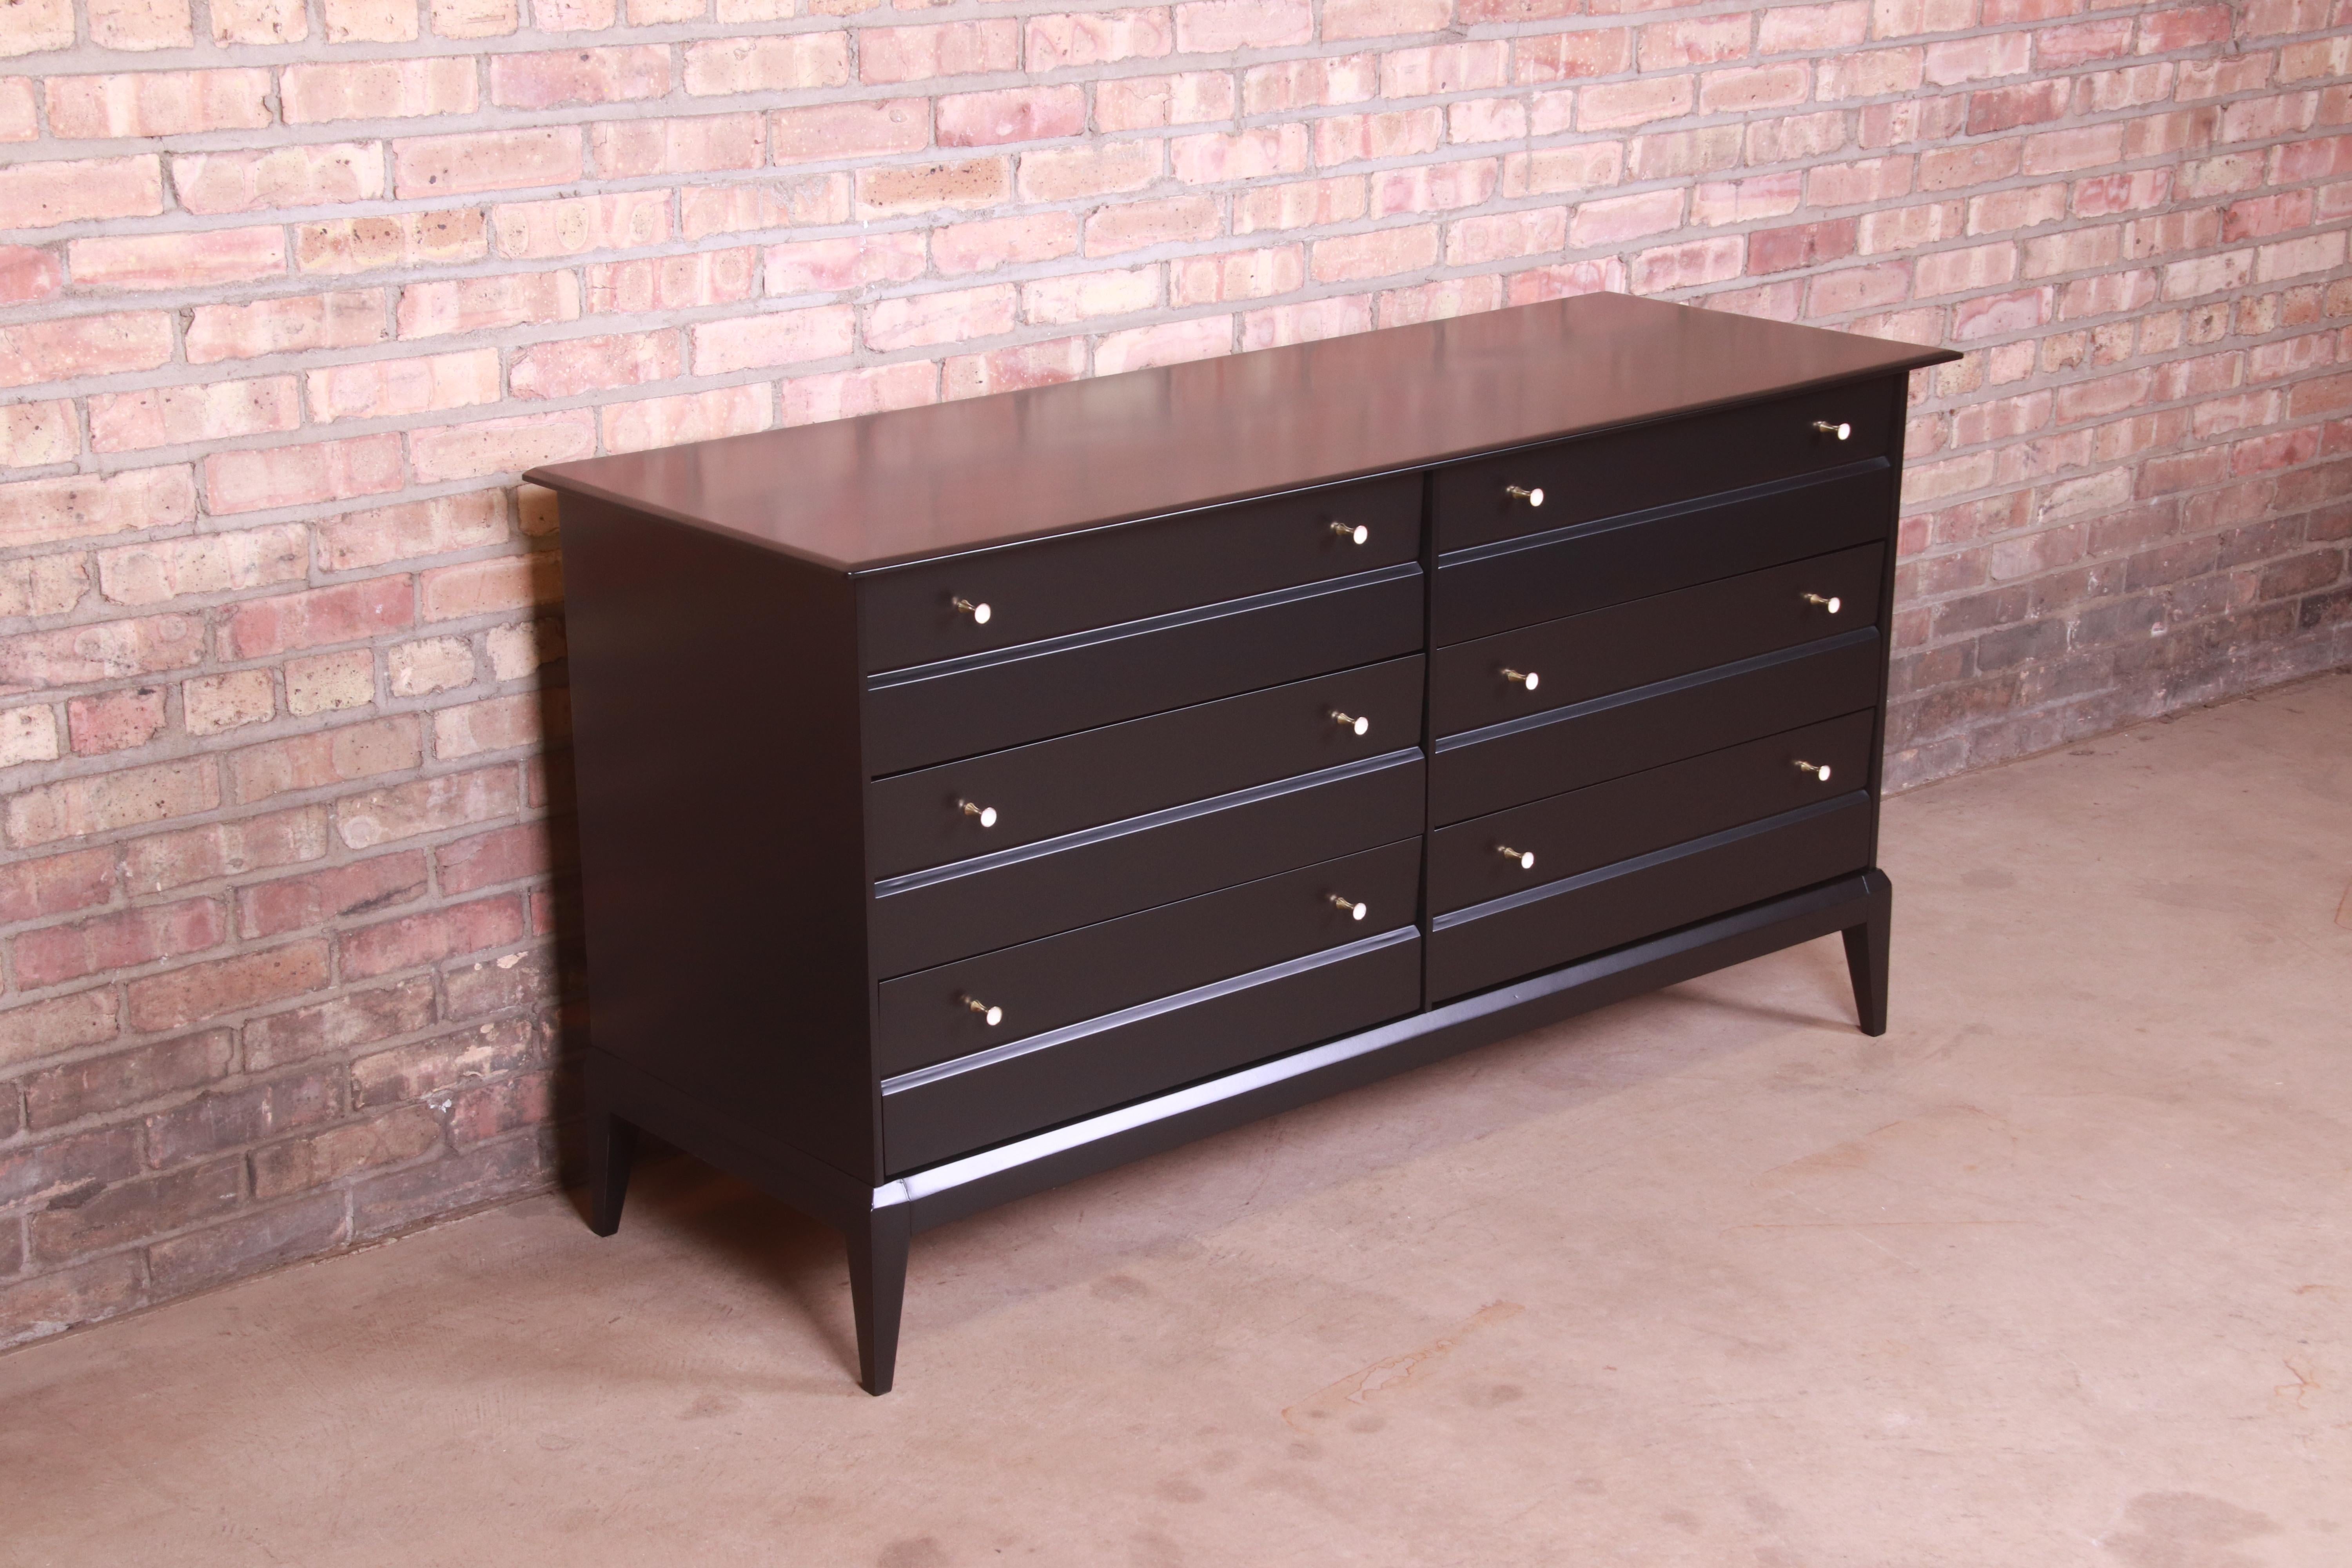 Mid-20th Century Paul McCobb Style Black Lacquered Dresser by Heywood Wakefield, Newly Refinished